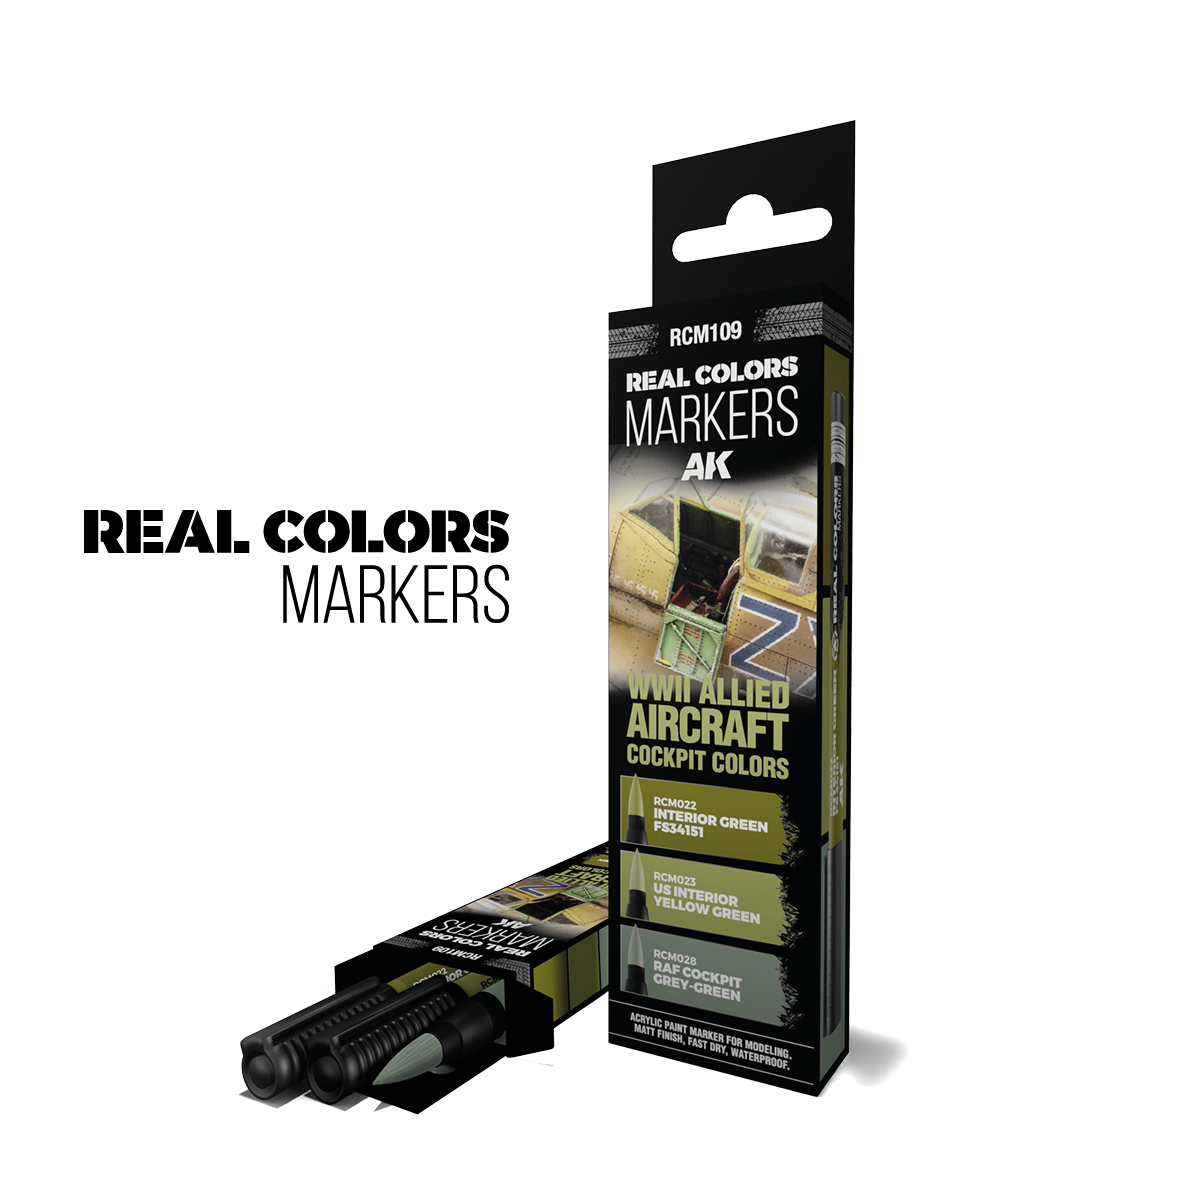 WWII ALLIED AIRCRAFT COCKPIT COLORS – RC MARKERS SET